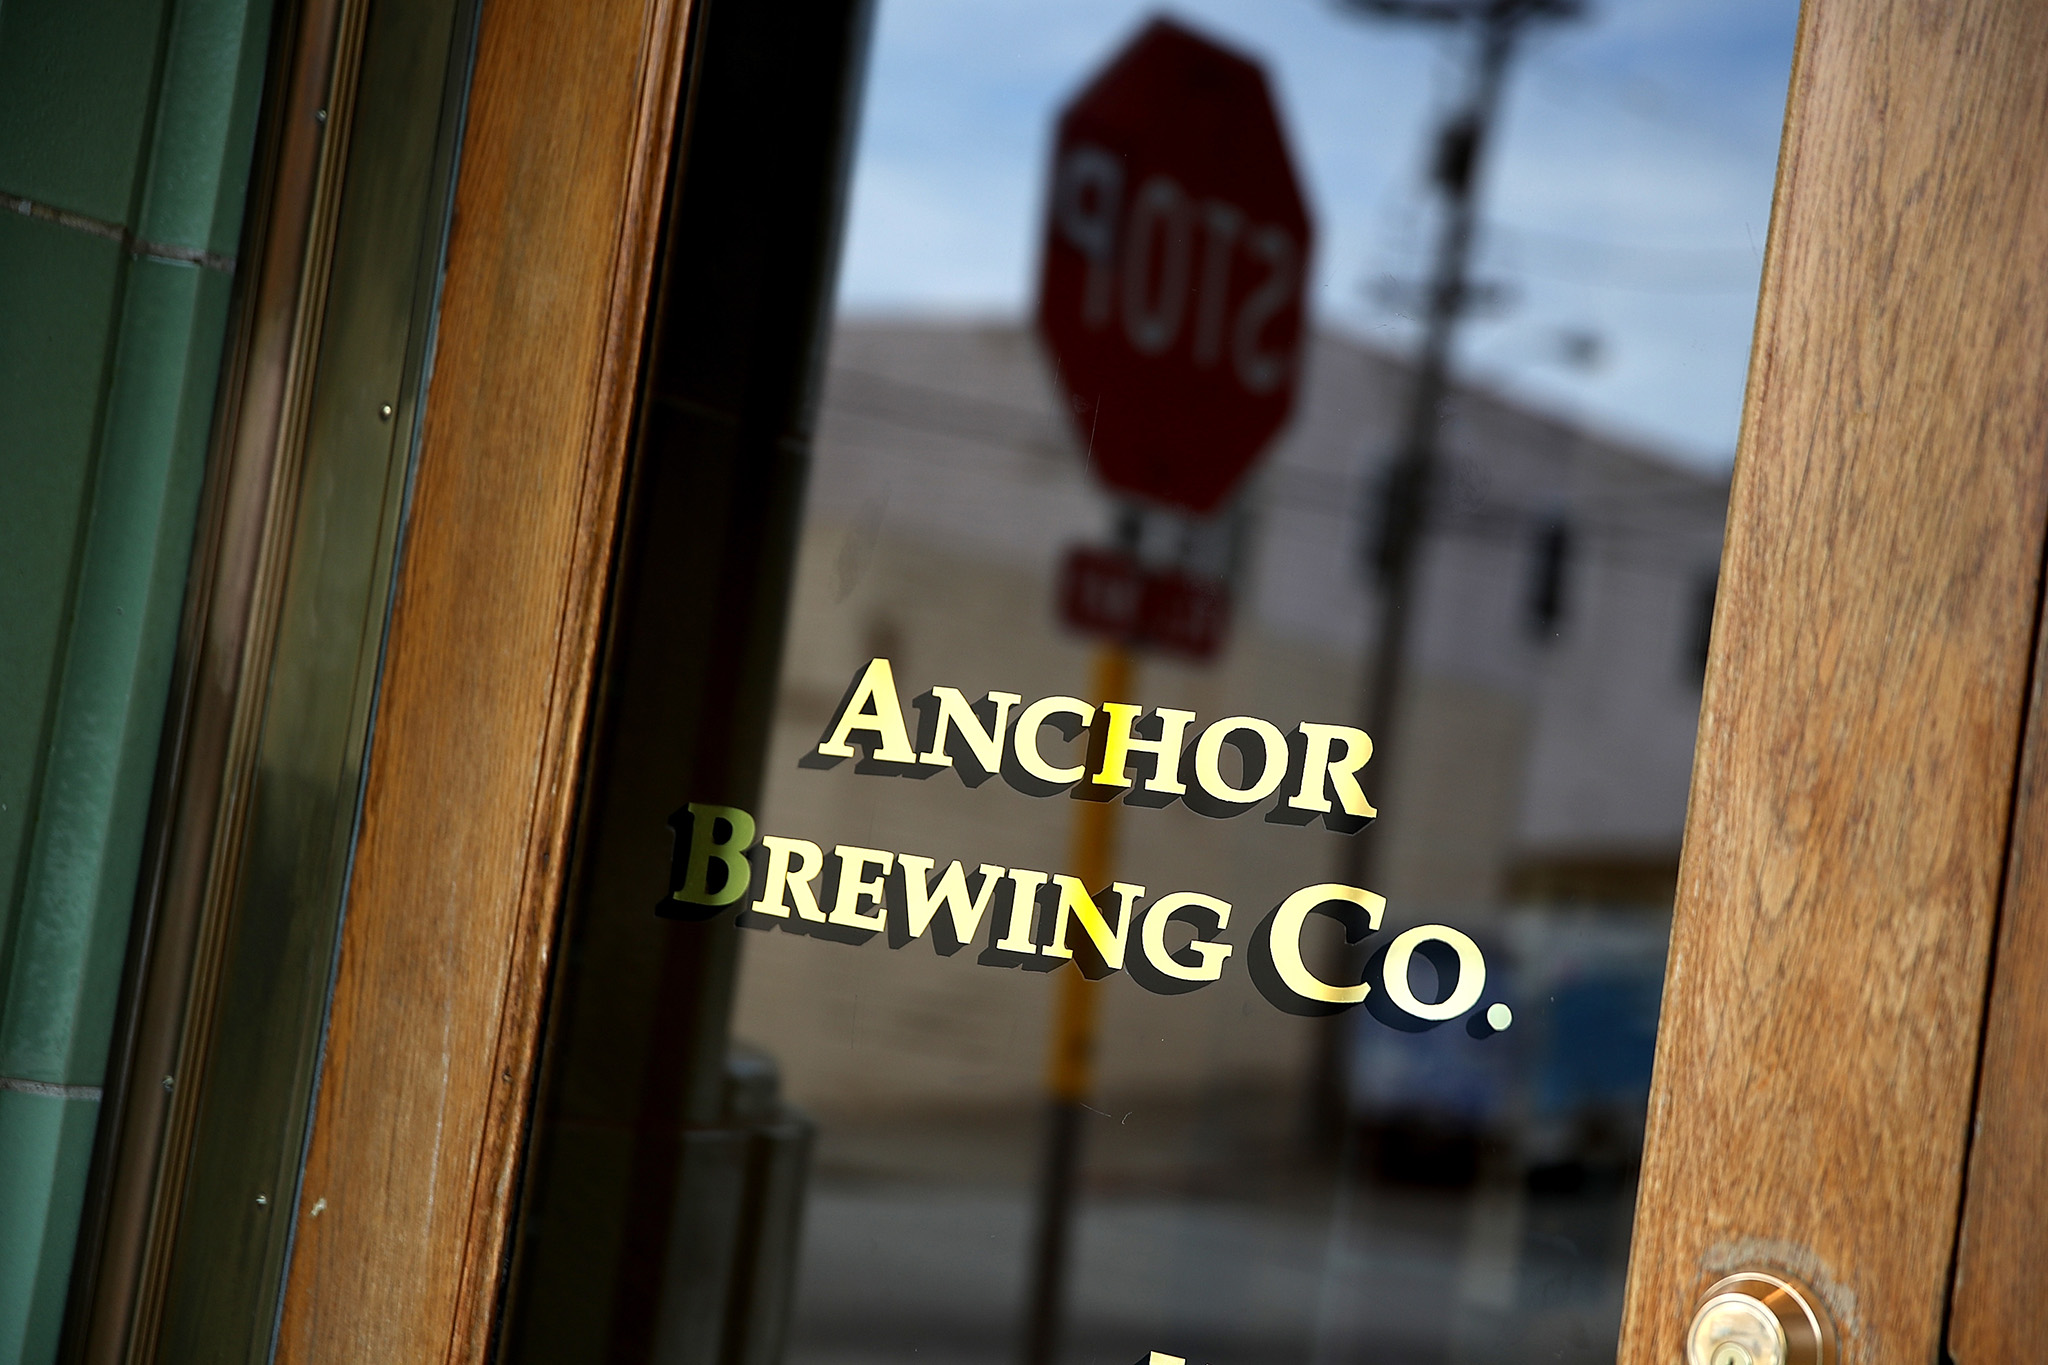 San Francisco’s Anchor Brewing Company has announced it will cease operations